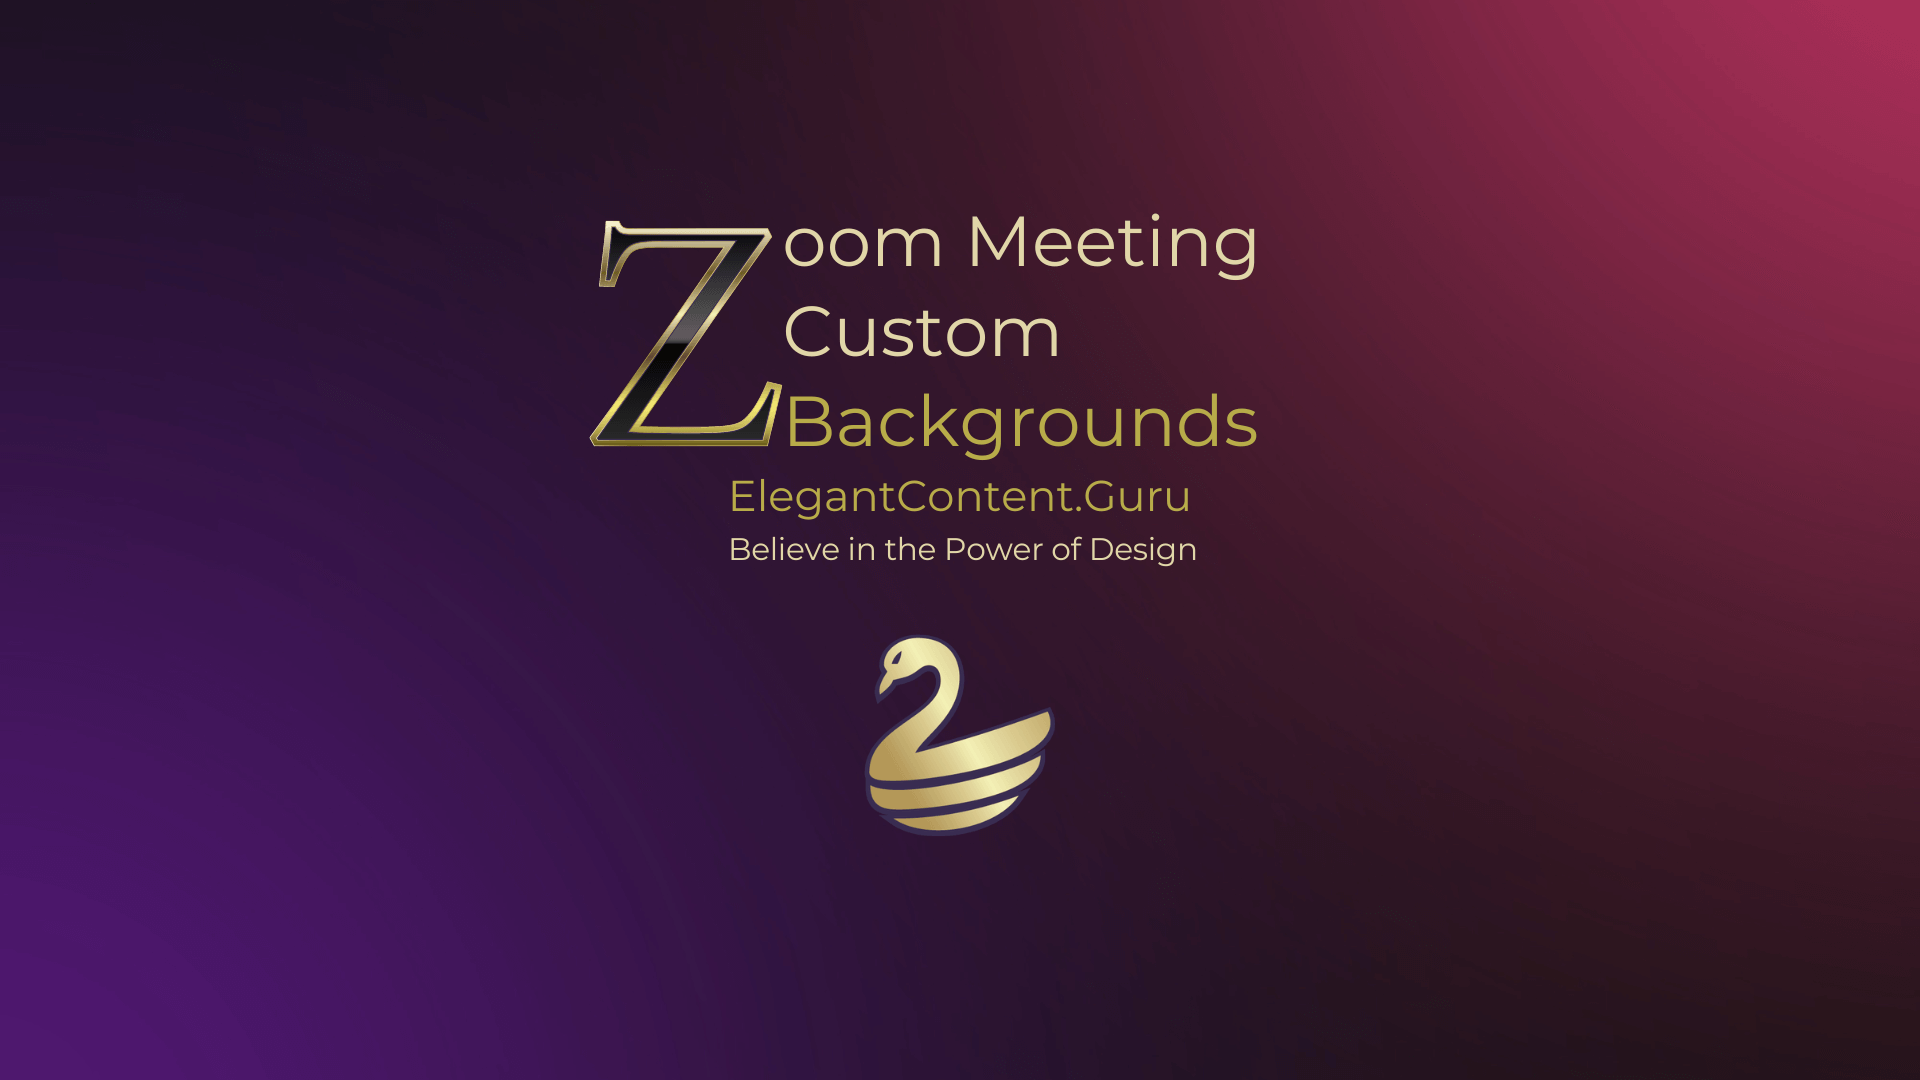 Zoom Virtual Meeting Backgrounds with Logos Believe in the Power of Design